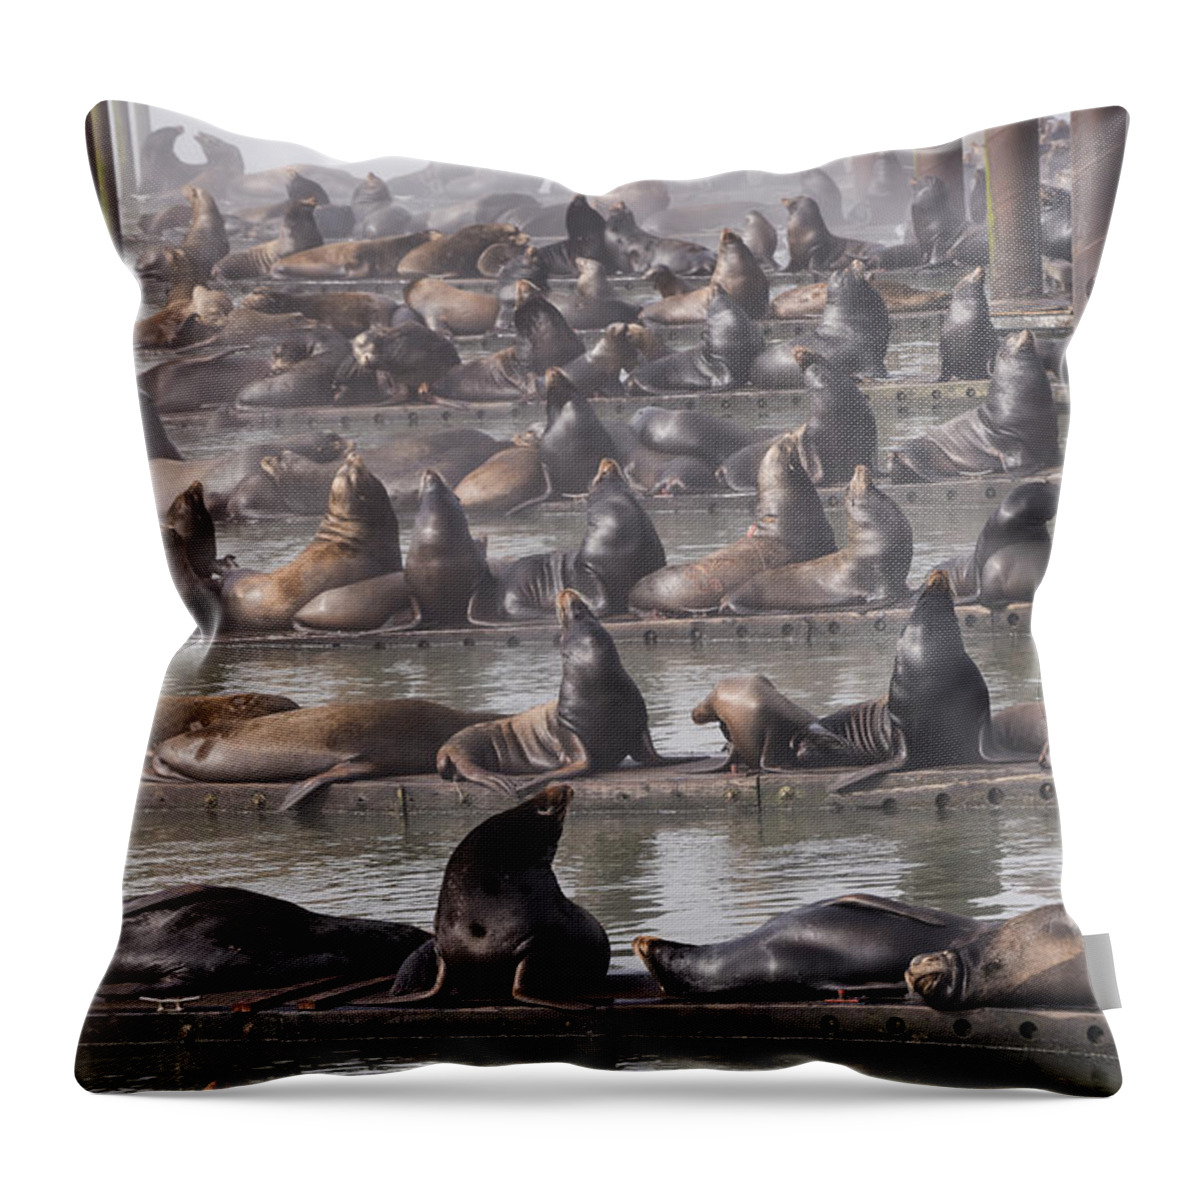 Animals Throw Pillow featuring the photograph Astoria Sea Lions by Robert Potts